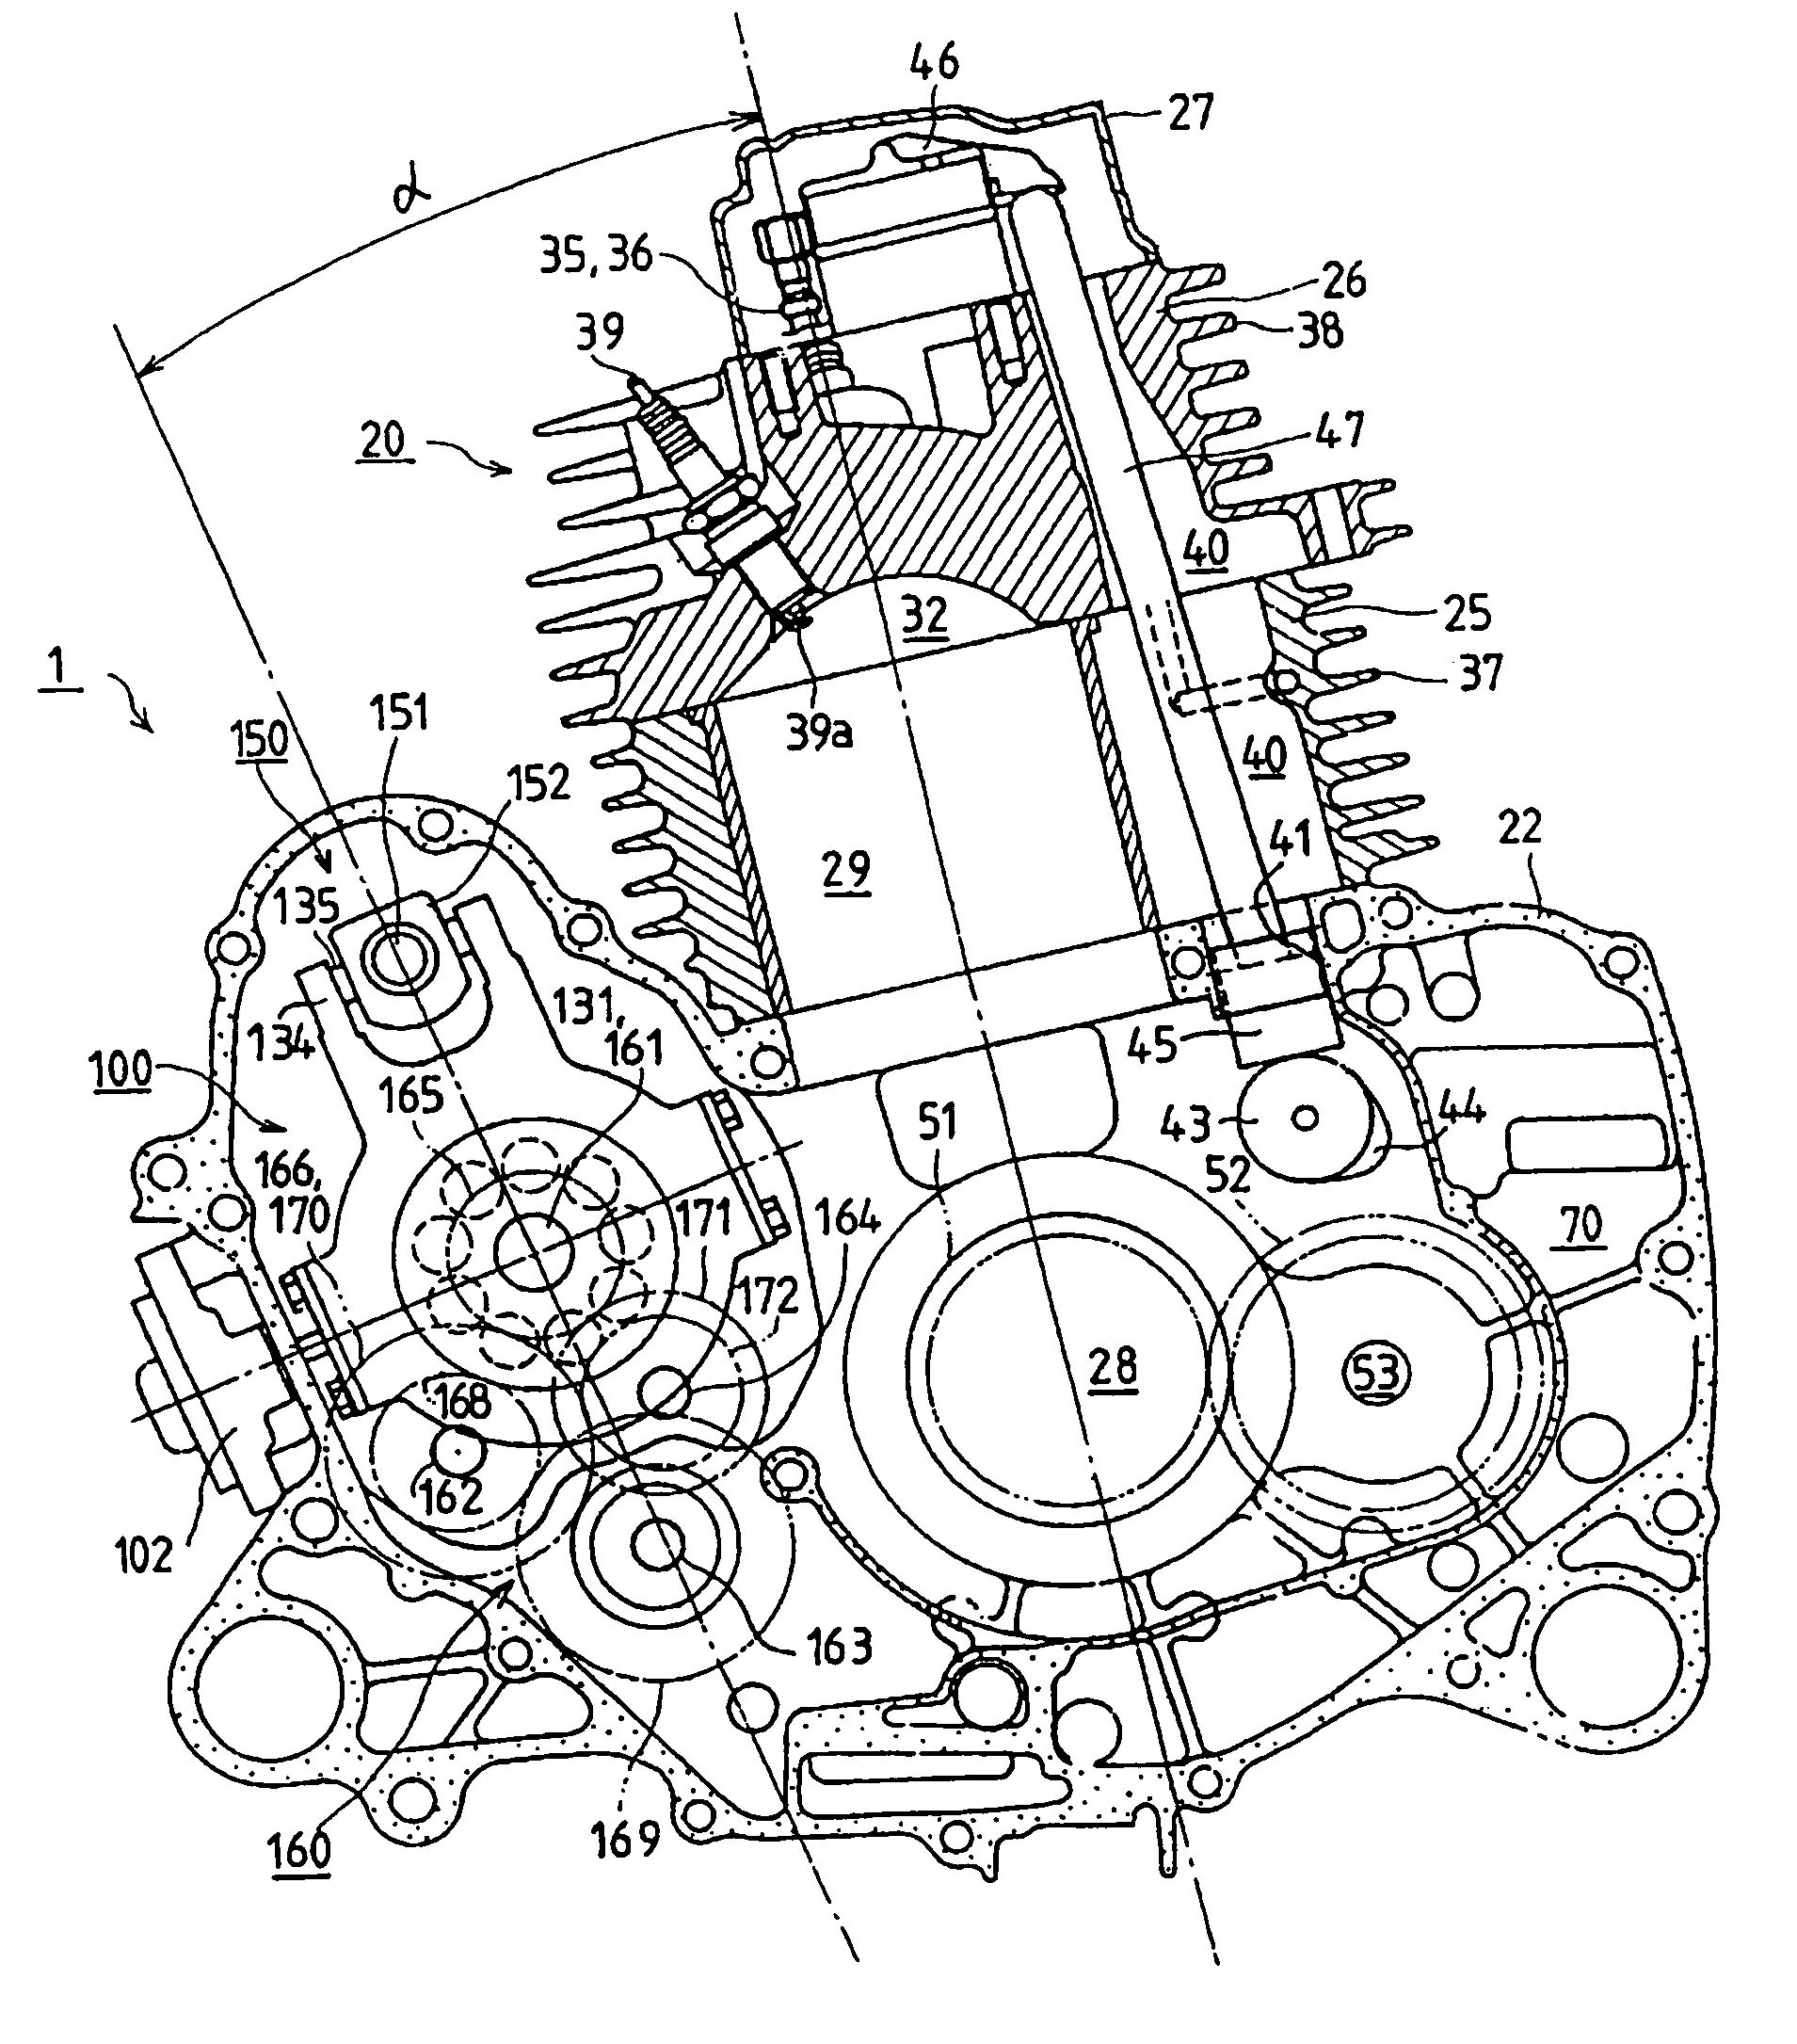 Power unit for vehicle with internal combustion engine